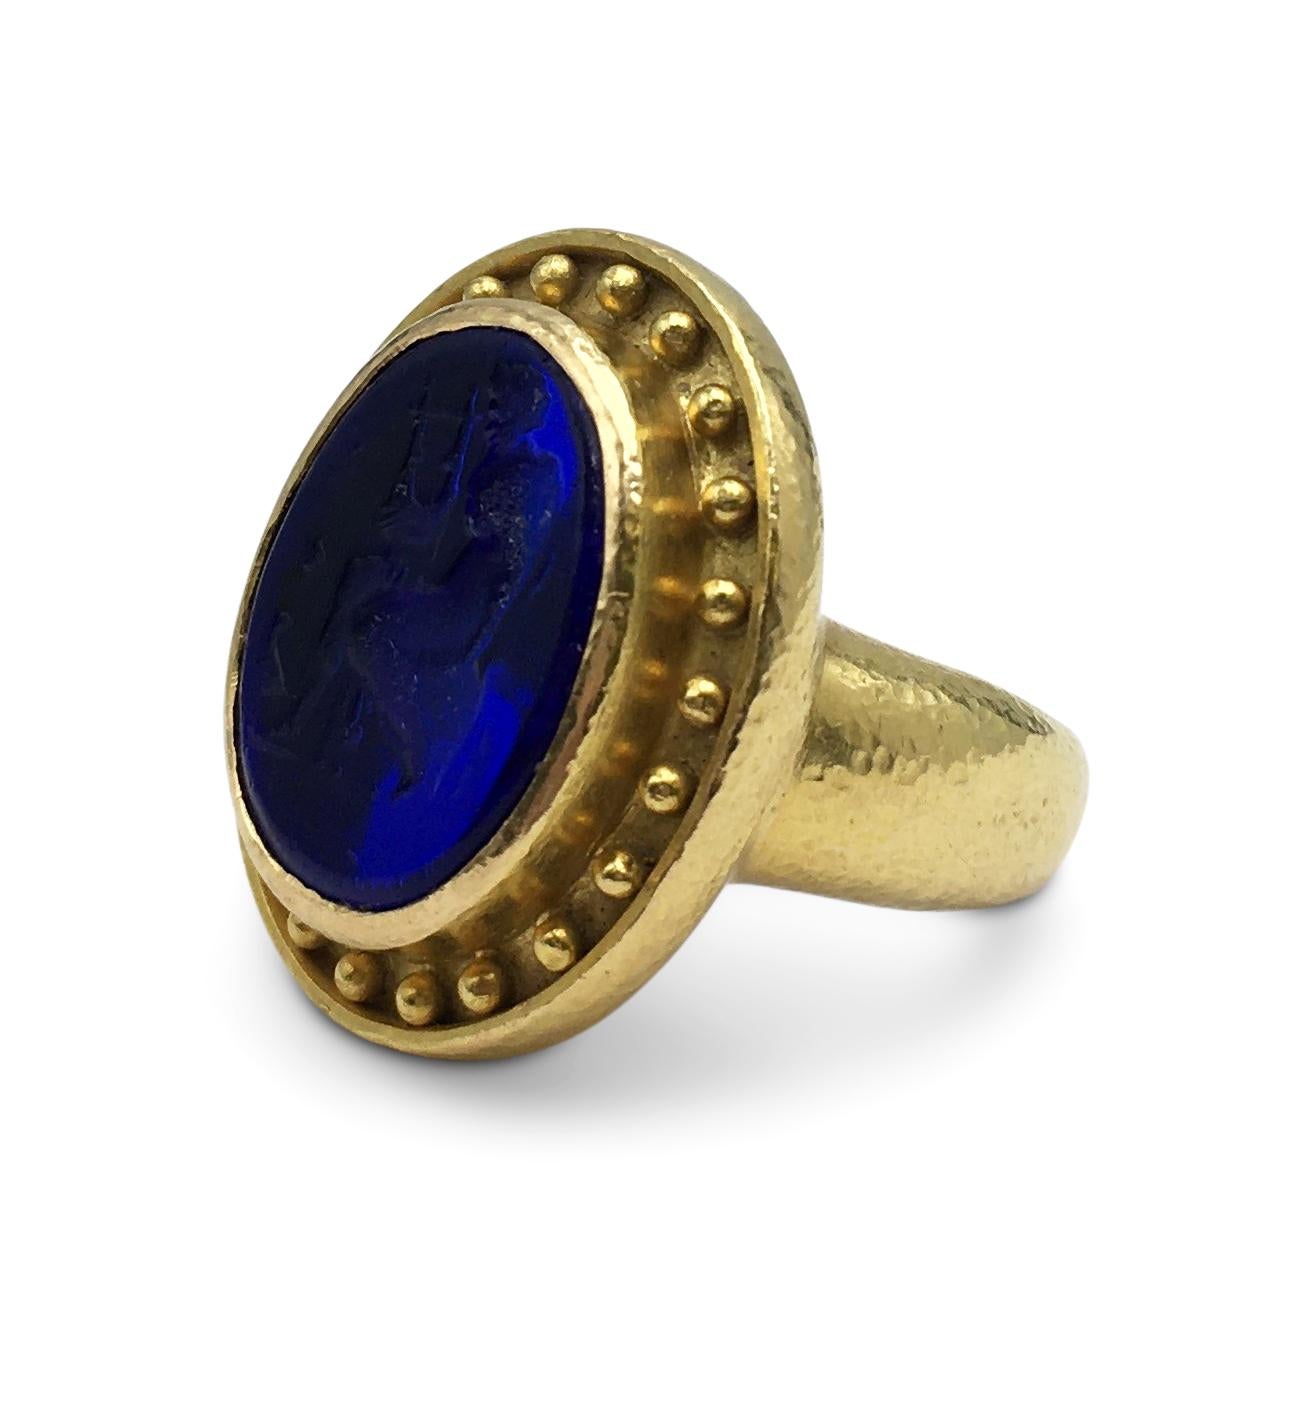 Authentic Elizabeth Locke ring crafted in 18 karat gold centers on an intaglio carved from Venetian glass. Ring size 5. Not presented with original box or papers. CIRCA 2010s.